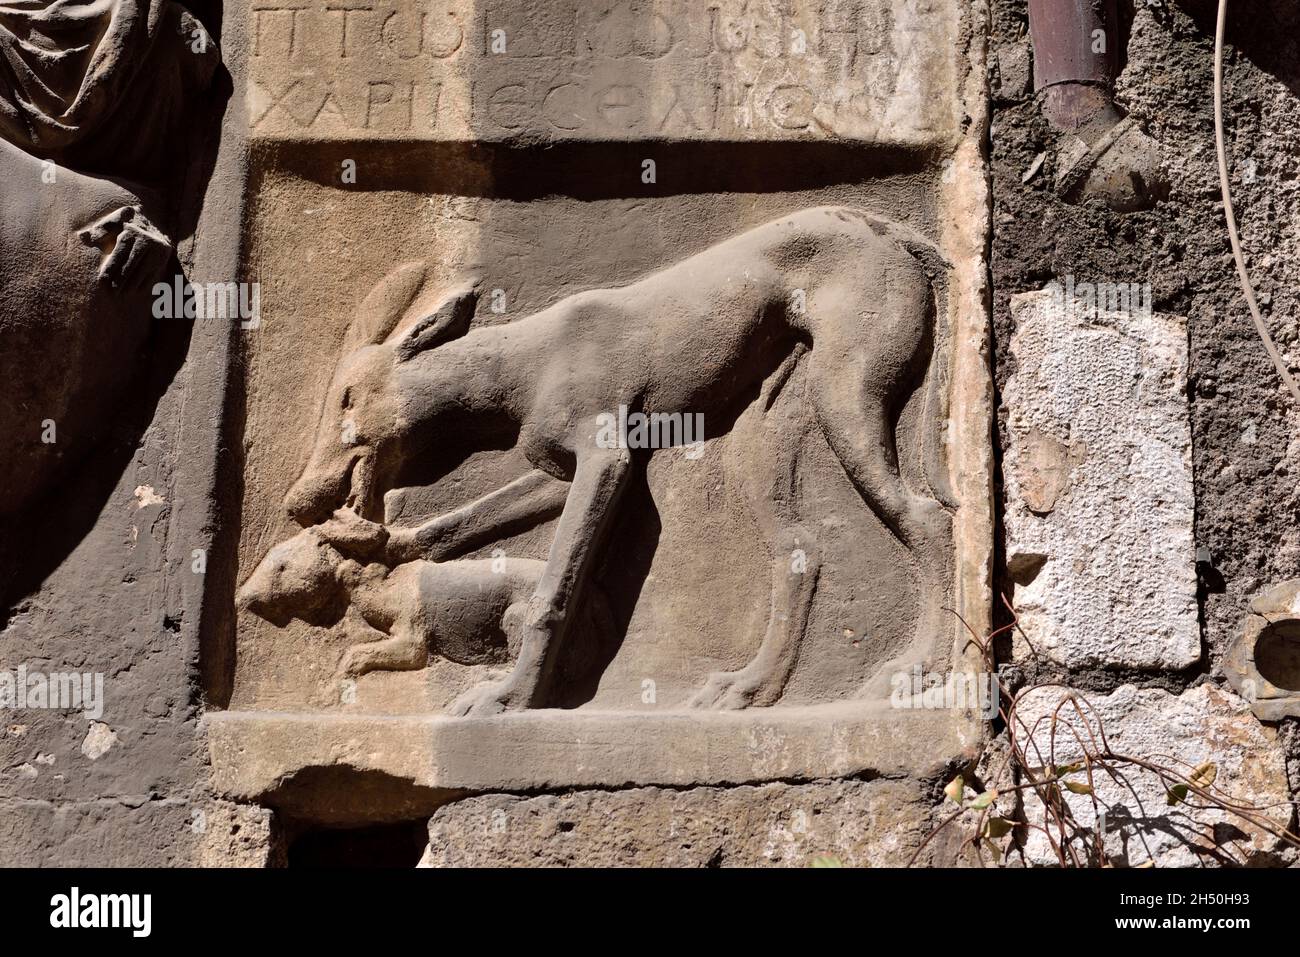 Italy, Rome, Jewish Ghetto, Via del Portico d'Ottavia, house of Lorenzo Manilio, greek inscription and bas relief with deer and fawn Stock Photo